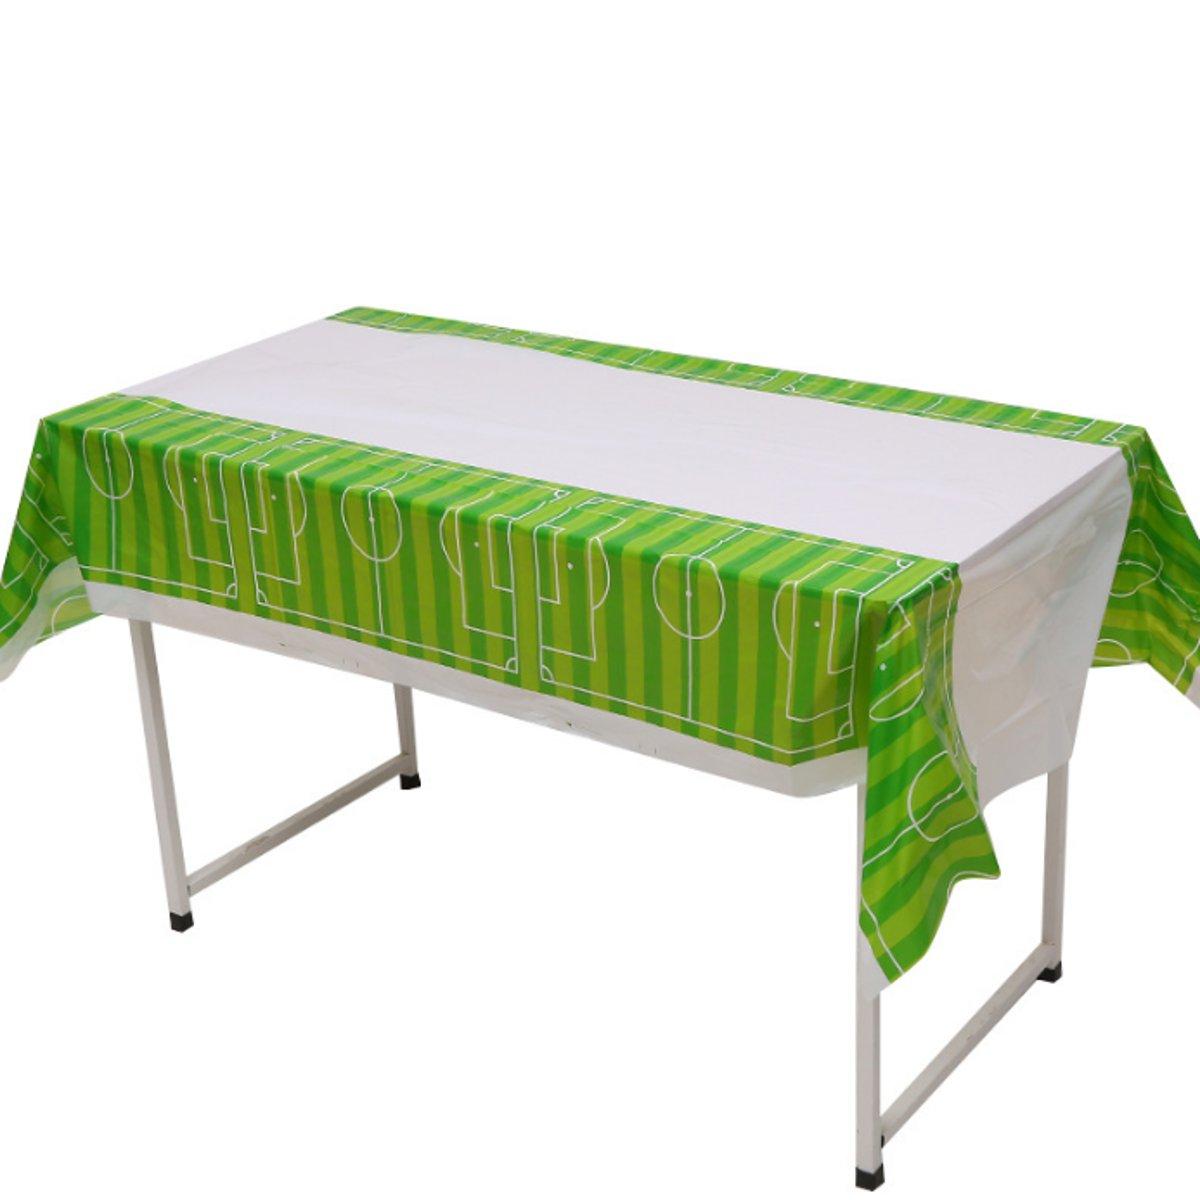 1.8x1.08m Tablecloth Football Print Table Cover Camping Disposable Plastic Picnic Mat